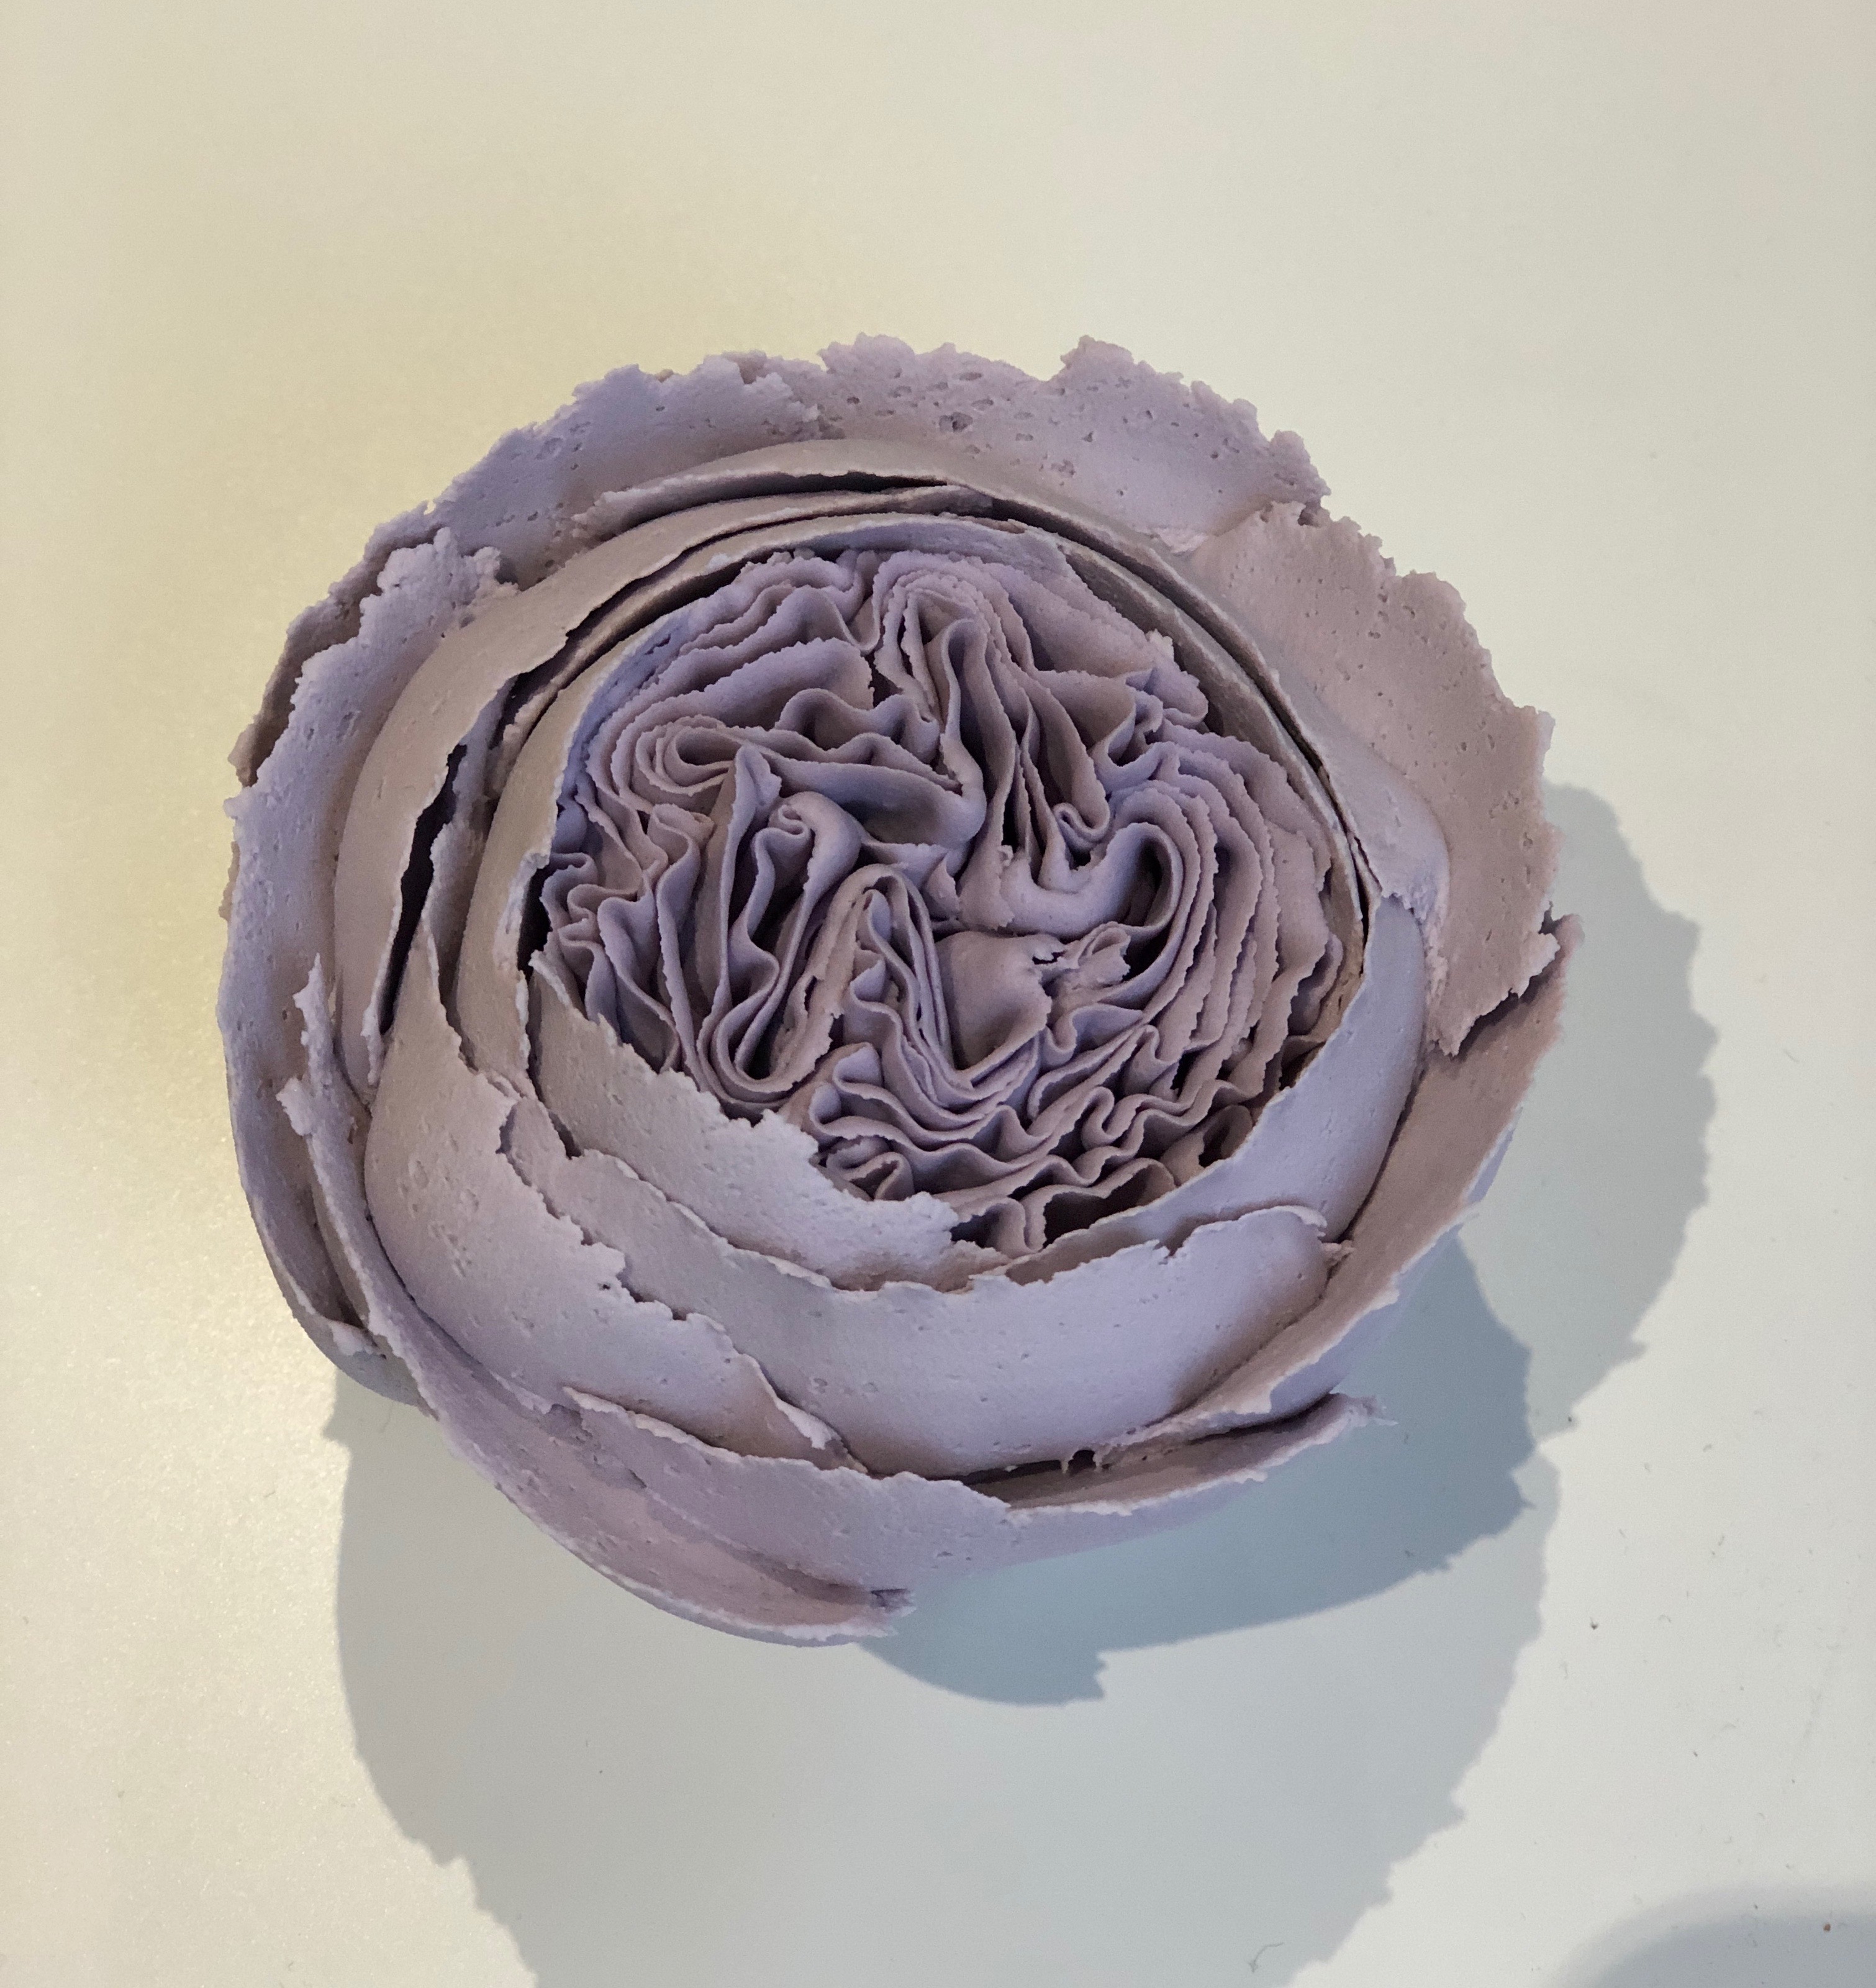 how to pipe buttercream frosting flowers, how to pipe buttercream roses,